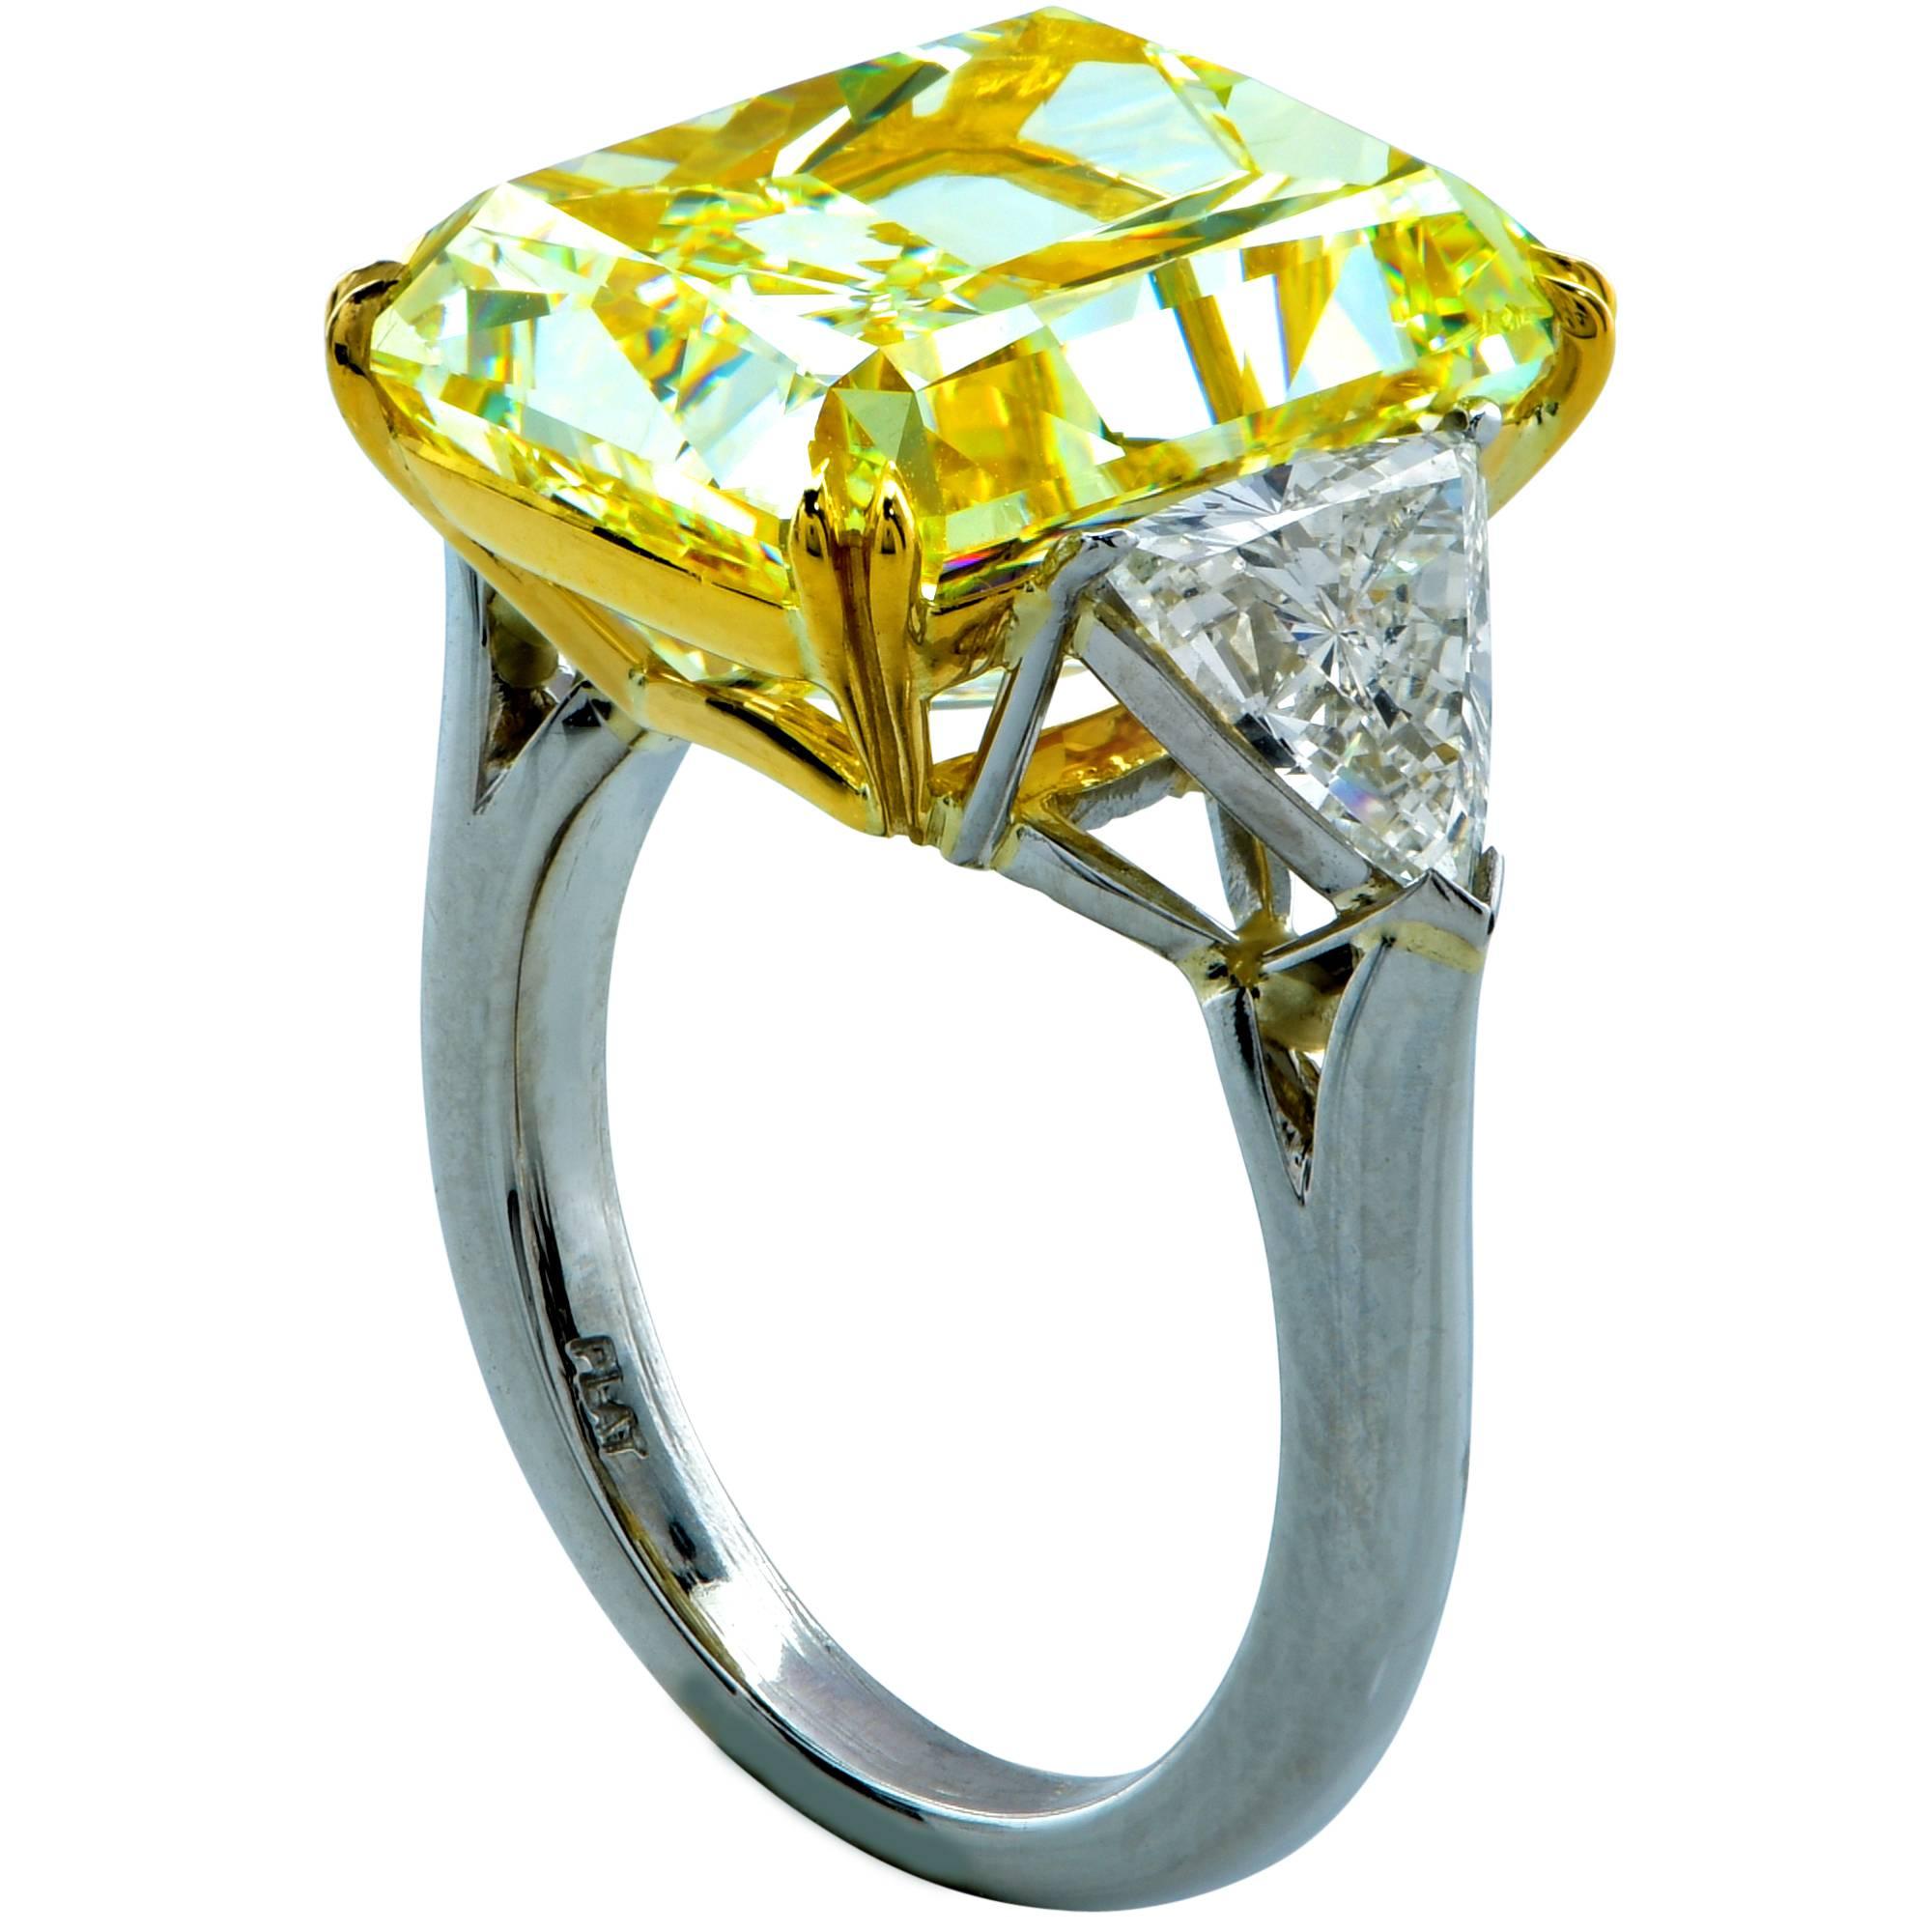 This alluring three stone diamond engagement ring features a GIA graded 14.20ct fancy light yellow radiant cut diamond with VS2 clarity. This beautiful diamond has incredible saturation of color and immaculate scintillation. It is masterfully